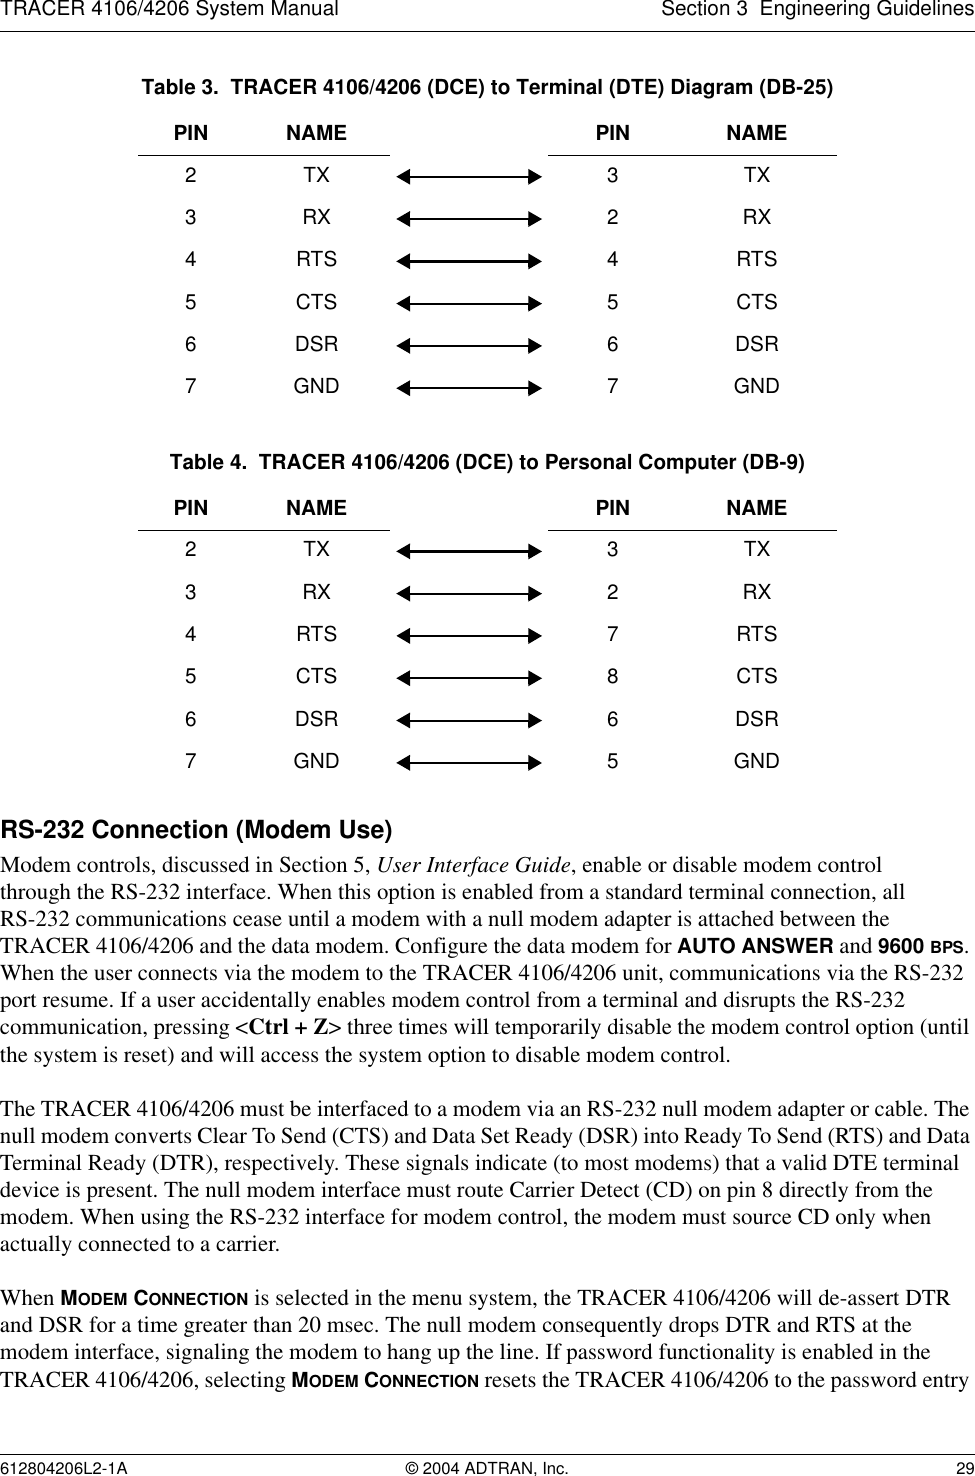 TRACER 4106/4206 System Manual Section 3  Engineering Guidelines612804206L2-1A © 2004 ADTRAN, Inc. 29RS-232 Connection (Modem Use)Modem controls, discussed in Section 5, User Interface Guide, enable or disable modem controlthrough the RS-232 interface. When this option is enabled from a standard terminal connection, allRS-232 communications cease until a modem with a null modem adapter is attached between the TRACER 4106/4206 and the data modem. Configure the data modem for AUTO ANSWER and 9600 BPS. When the user connects via the modem to the TRACER 4106/4206 unit, communications via the RS-232 port resume. If a user accidentally enables modem control from a terminal and disrupts the RS-232 communication, pressing &lt;Ctrl + Z&gt; three times will temporarily disable the modem control option (until the system is reset) and will access the system option to disable modem control.The TRACER 4106/4206 must be interfaced to a modem via an RS-232 null modem adapter or cable. The null modem converts Clear To Send (CTS) and Data Set Ready (DSR) into Ready To Send (RTS) and Data Terminal Ready (DTR), respectively. These signals indicate (to most modems) that a valid DTE terminal device is present. The null modem interface must route Carrier Detect (CD) on pin 8 directly from the modem. When using the RS-232 interface for modem control, the modem must source CD only when actually connected to a carrier.When MODEM CONNECTION is selected in the menu system, the TRACER 4106/4206 will de-assert DTR and DSR for a time greater than 20 msec. The null modem consequently drops DTR and RTS at the modem interface, signaling the modem to hang up the line. If password functionality is enabled in the TRACER 4106/4206, selecting MODEM CONNECTION resets the TRACER 4106/4206 to the password entry Table 3.  TRACER 4106/4206 (DCE) to Terminal (DTE) Diagram (DB-25)PIN NAME PIN NAME2TX 3TX3RX 2RX4RTS 4RTS5CTS 5CTS6DSR 6DSR7 GND 7 GNDTable 4.  TRACER 4106/4206 (DCE) to Personal Computer (DB-9)PIN NAME PIN NAME2TX 3TX3RX 2RX4RTS 7RTS5CTS 8CTS6DSR 6DSR7 GND 5 GND